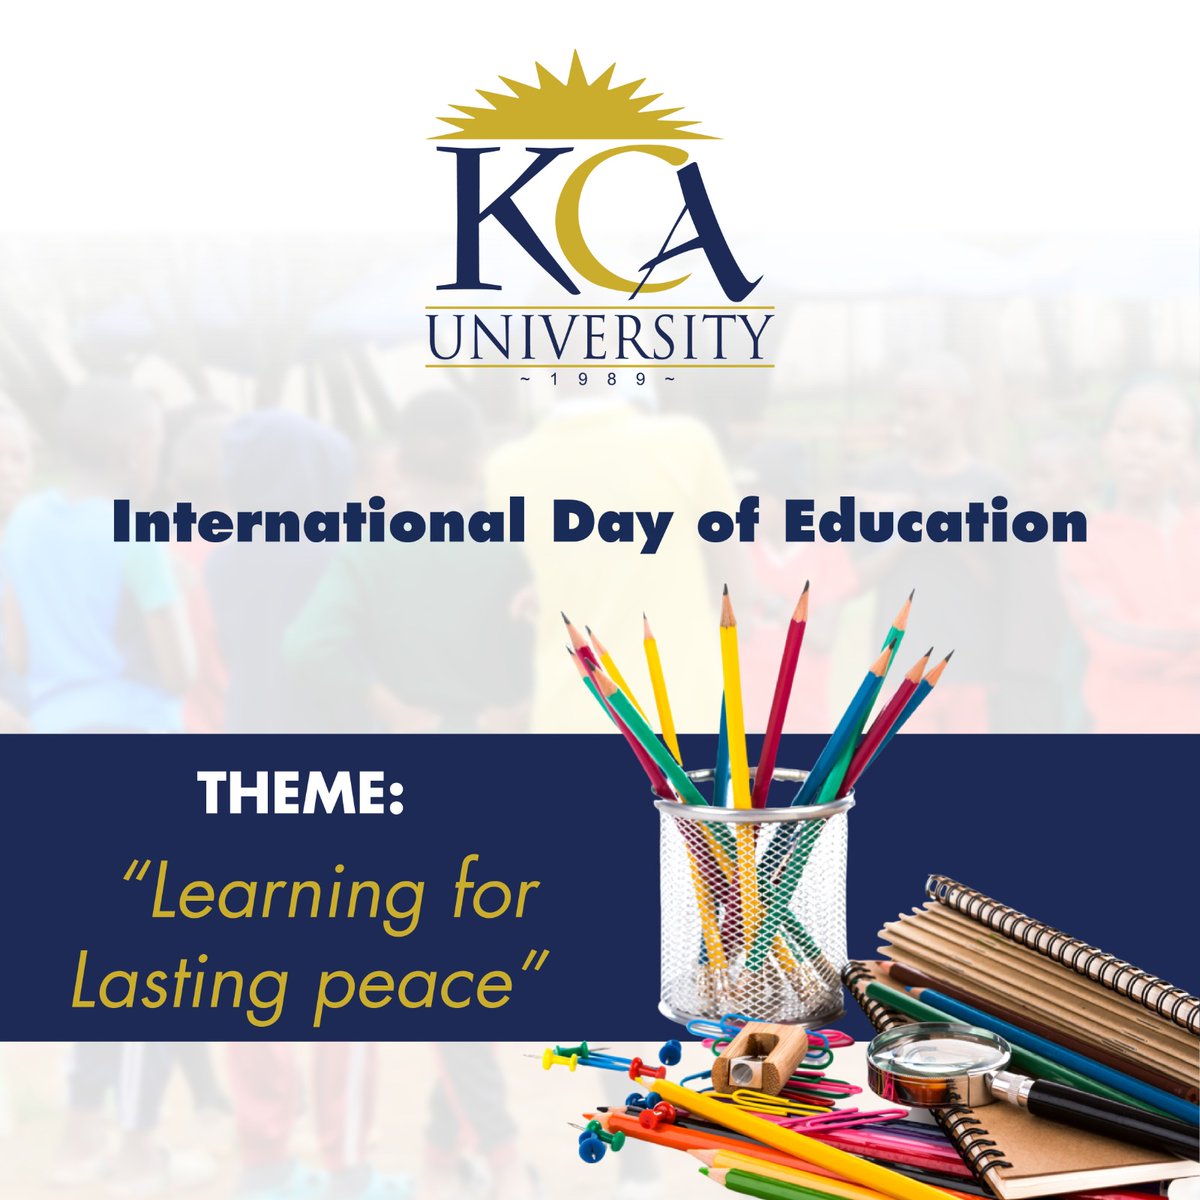 This day calls us to reflect on the milestones in #Education and the impact of education in fostering peace. Click here to read more👇 linkedin.com/pulse/celebrat… @UNESCO #KcauLevelUp #InternationalDayofEducation